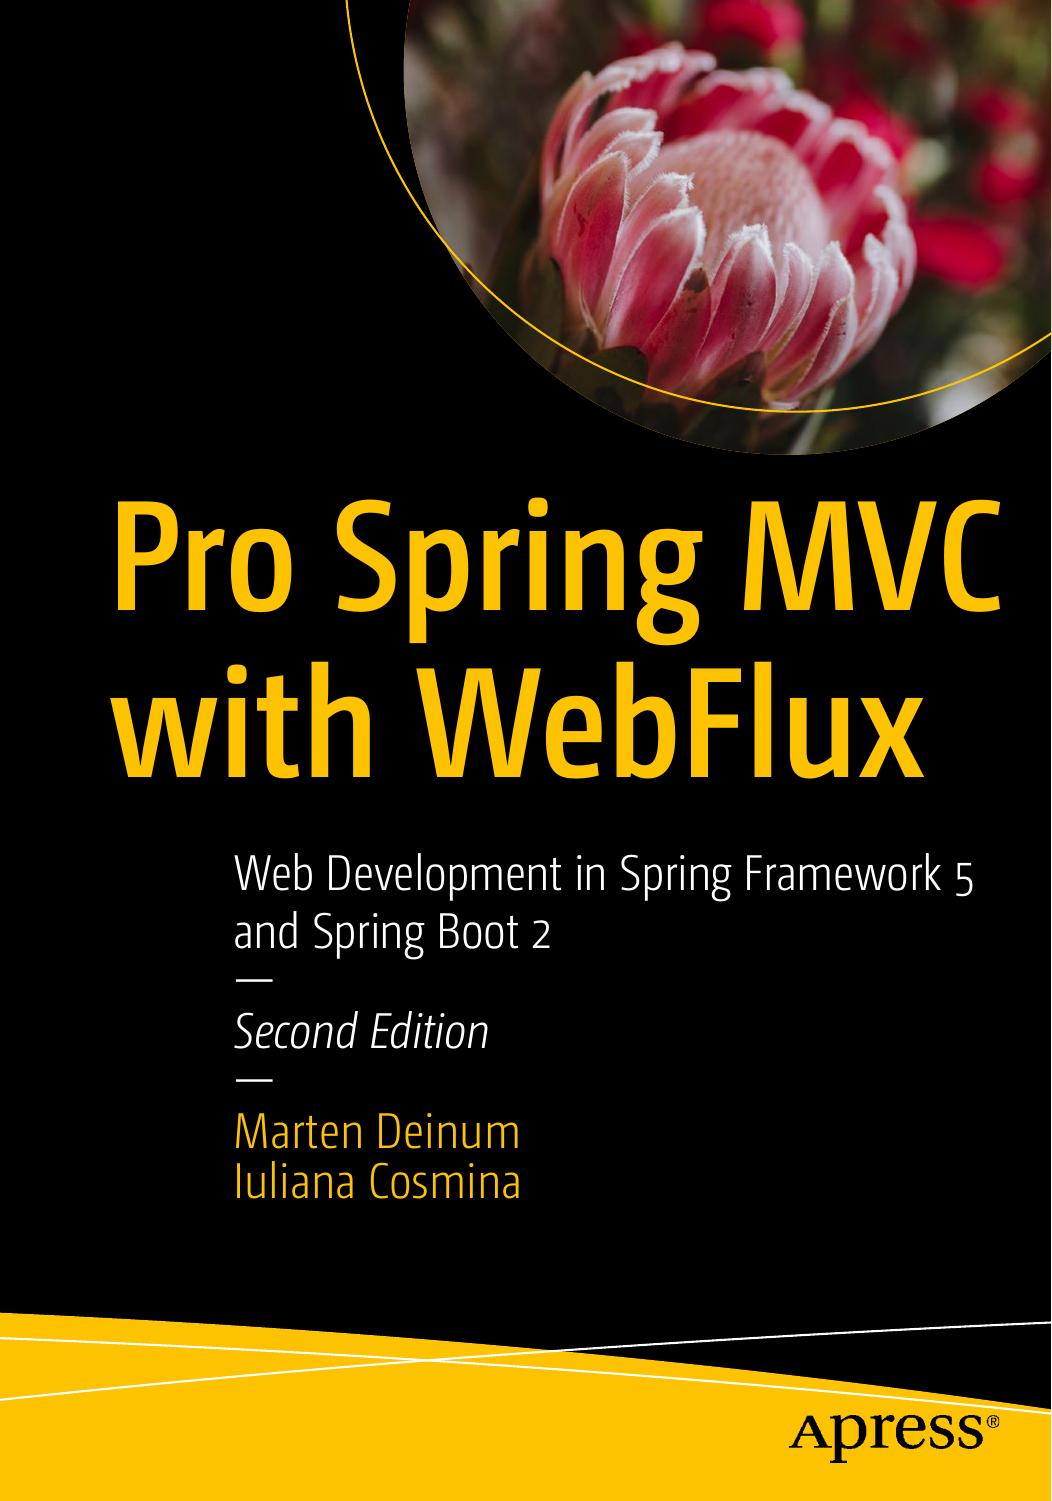 Pro Spring MVC With WebFlux: Web Development in Spring Framework 5 and Spring Boot 2